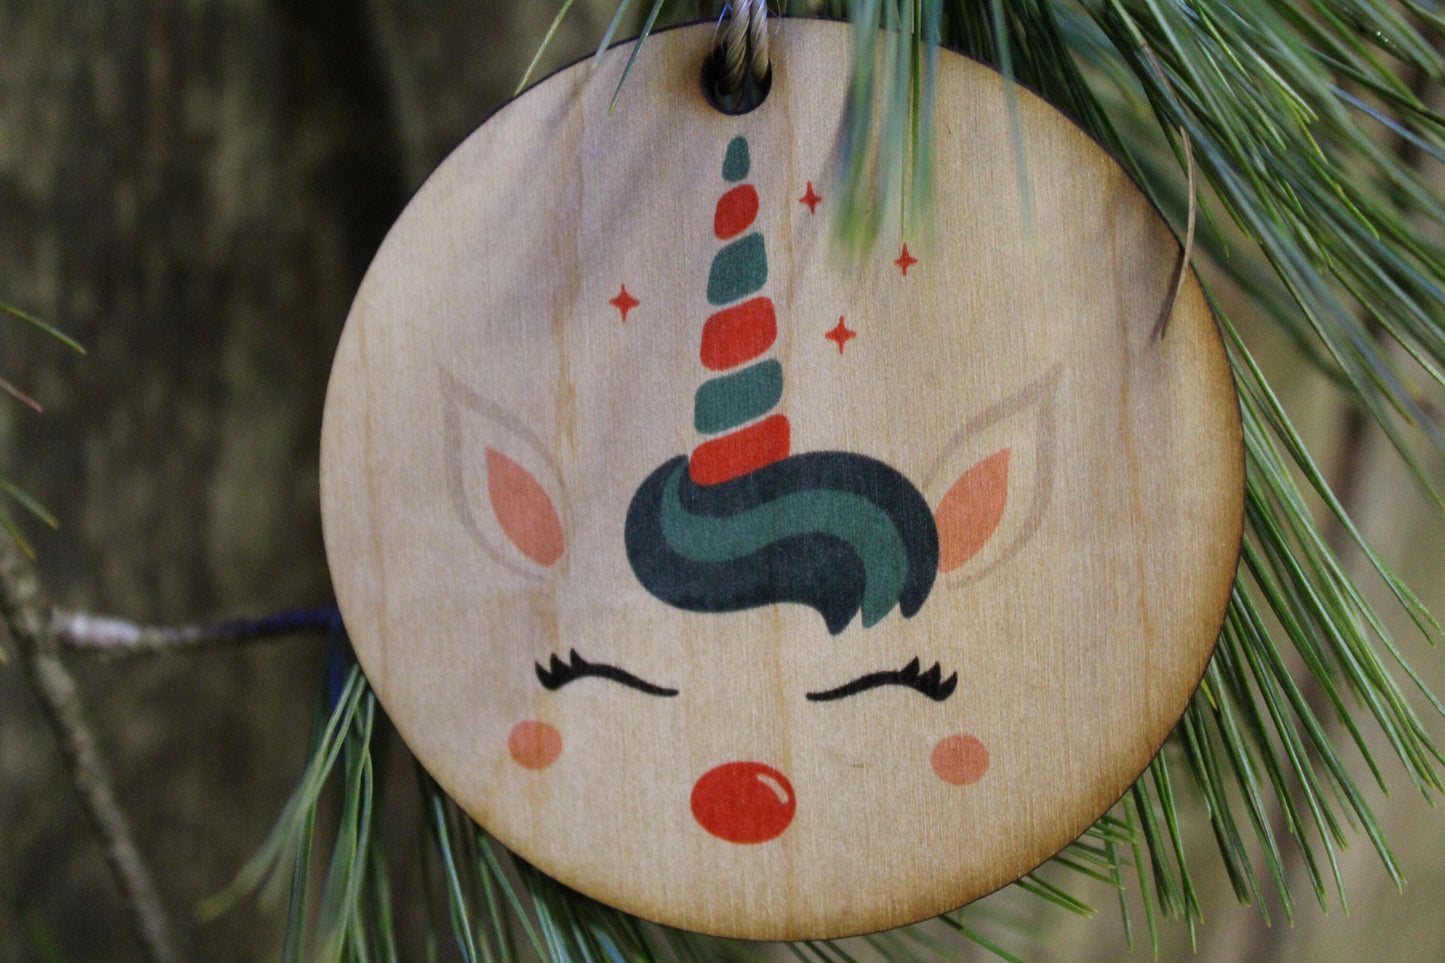 Unicorn Face Ornament Rudolph Red Nose Reindeer Wood Slice Horn Eyelashes Up-close Primitive Christmas Ornament Rustic Tree Printed